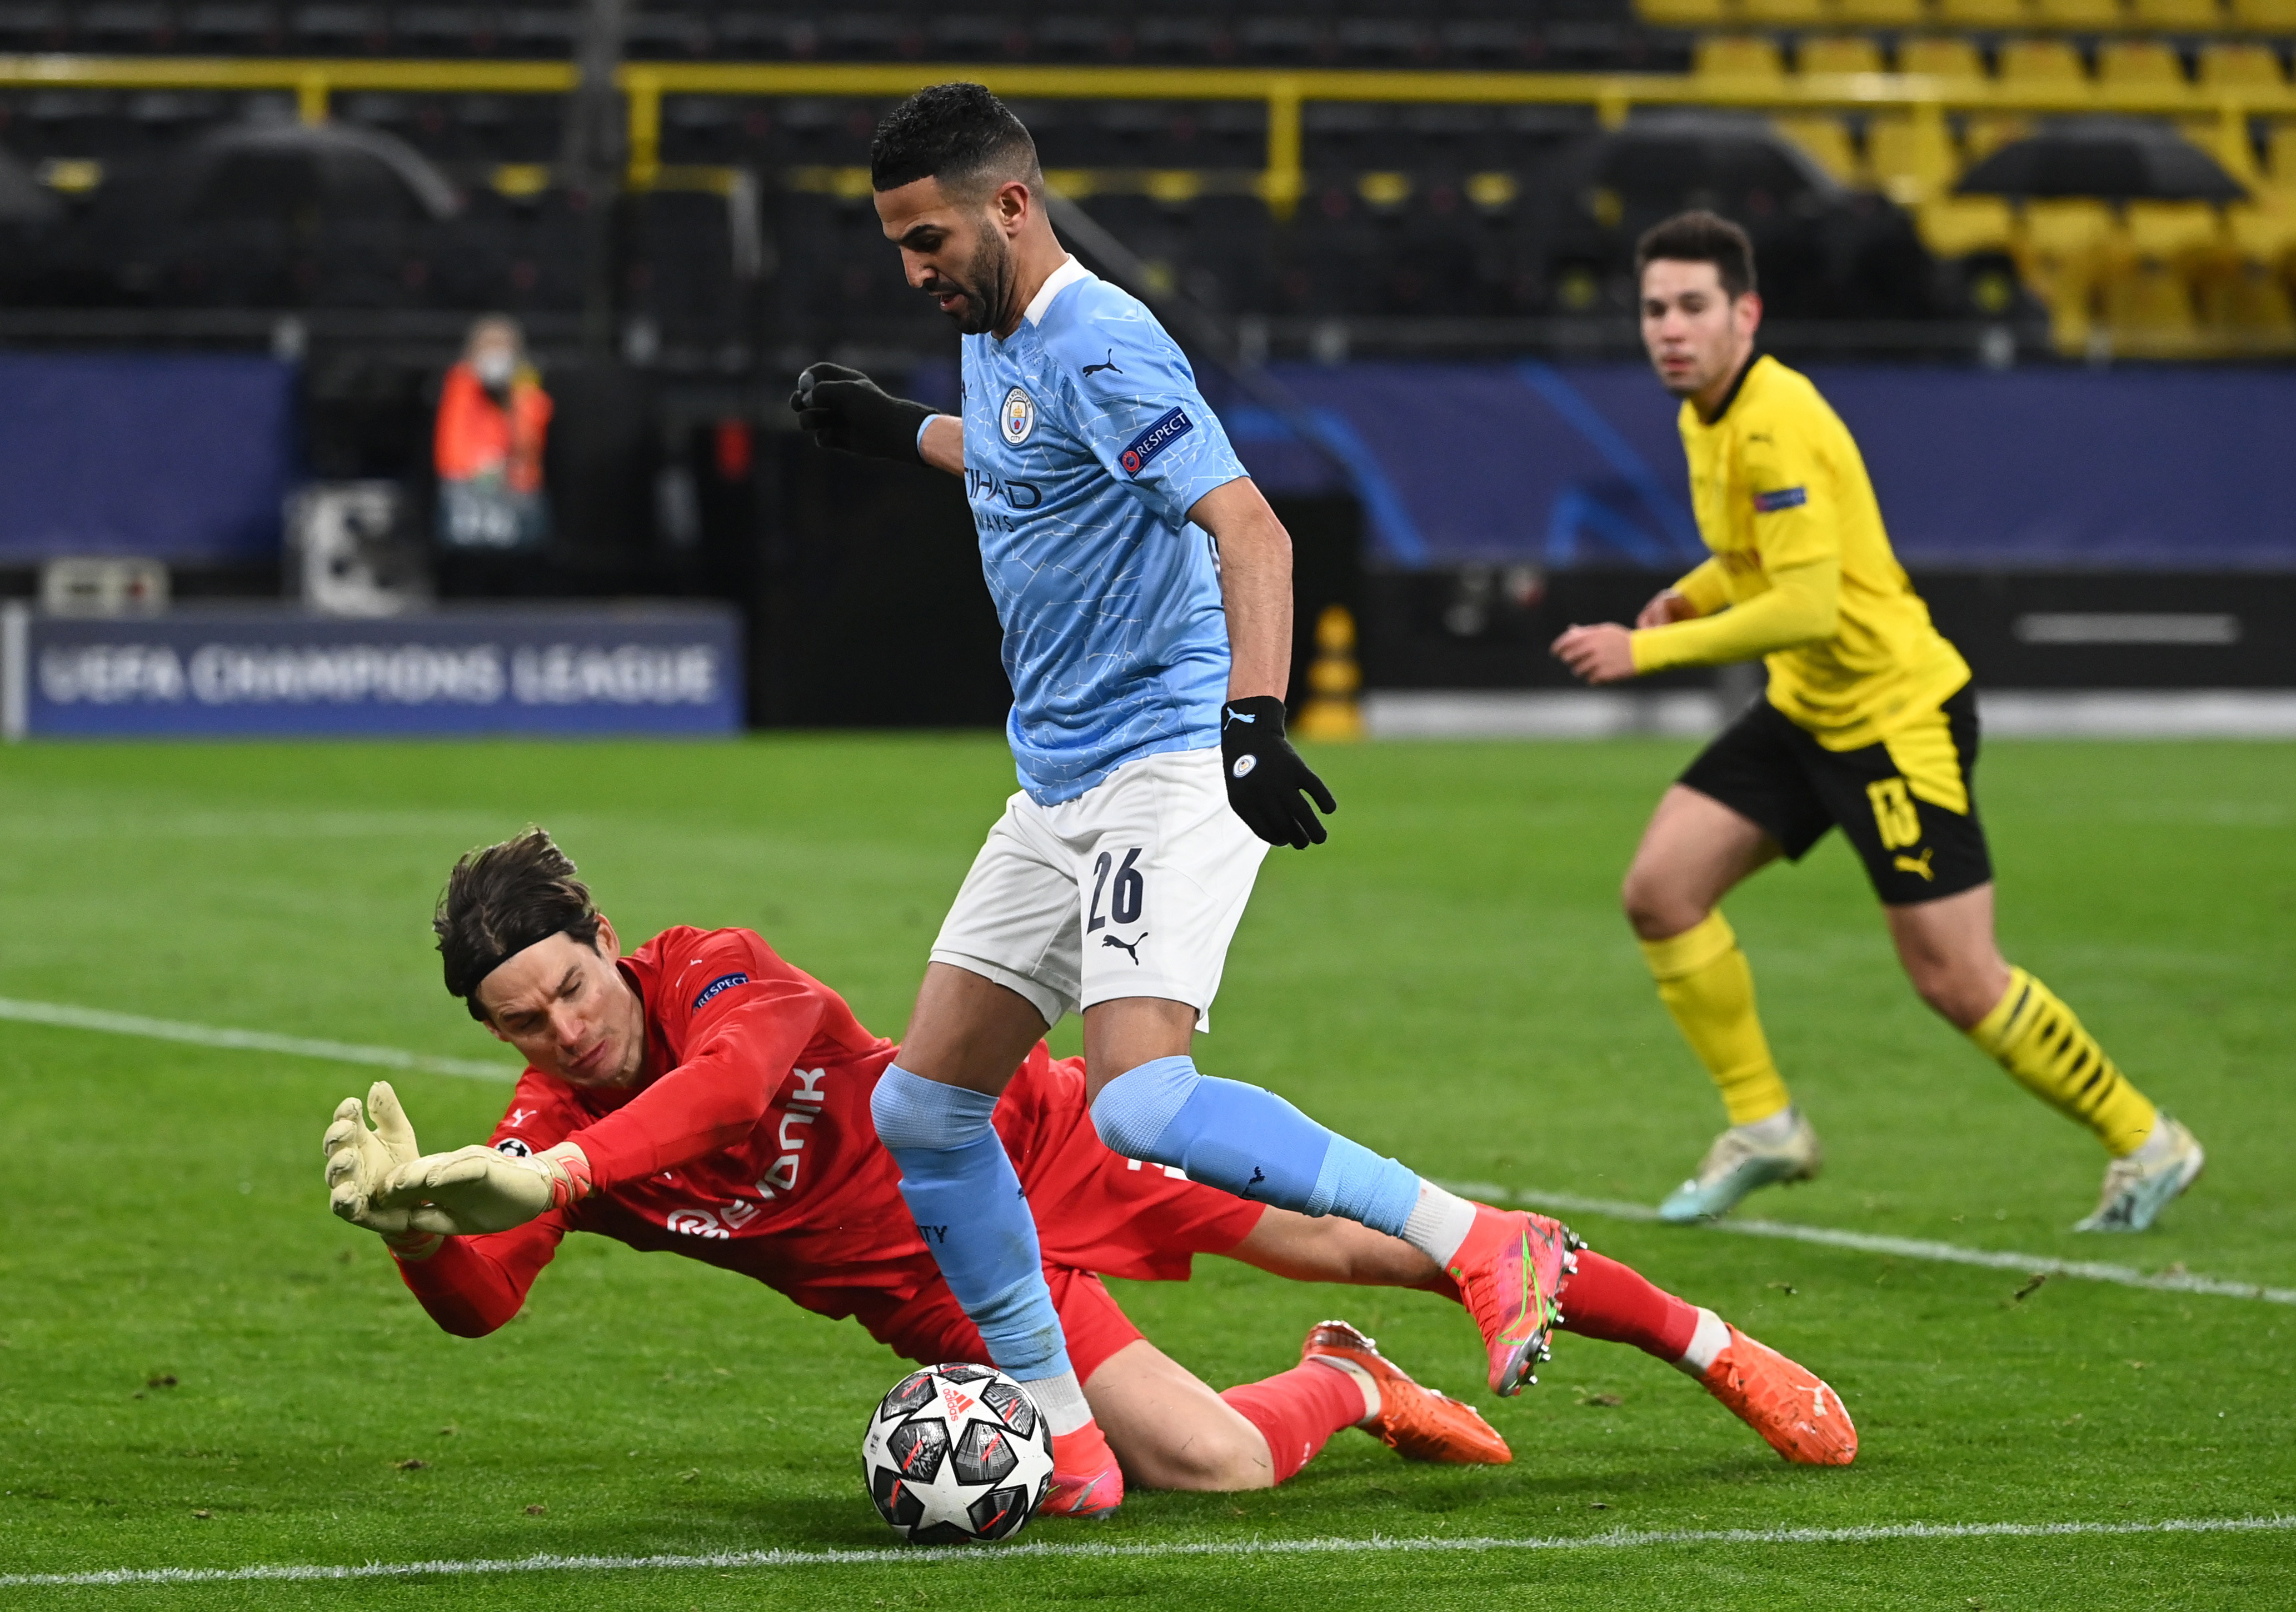 Man City reach Champions League semis with 2-1 win at Dortmund Reuters